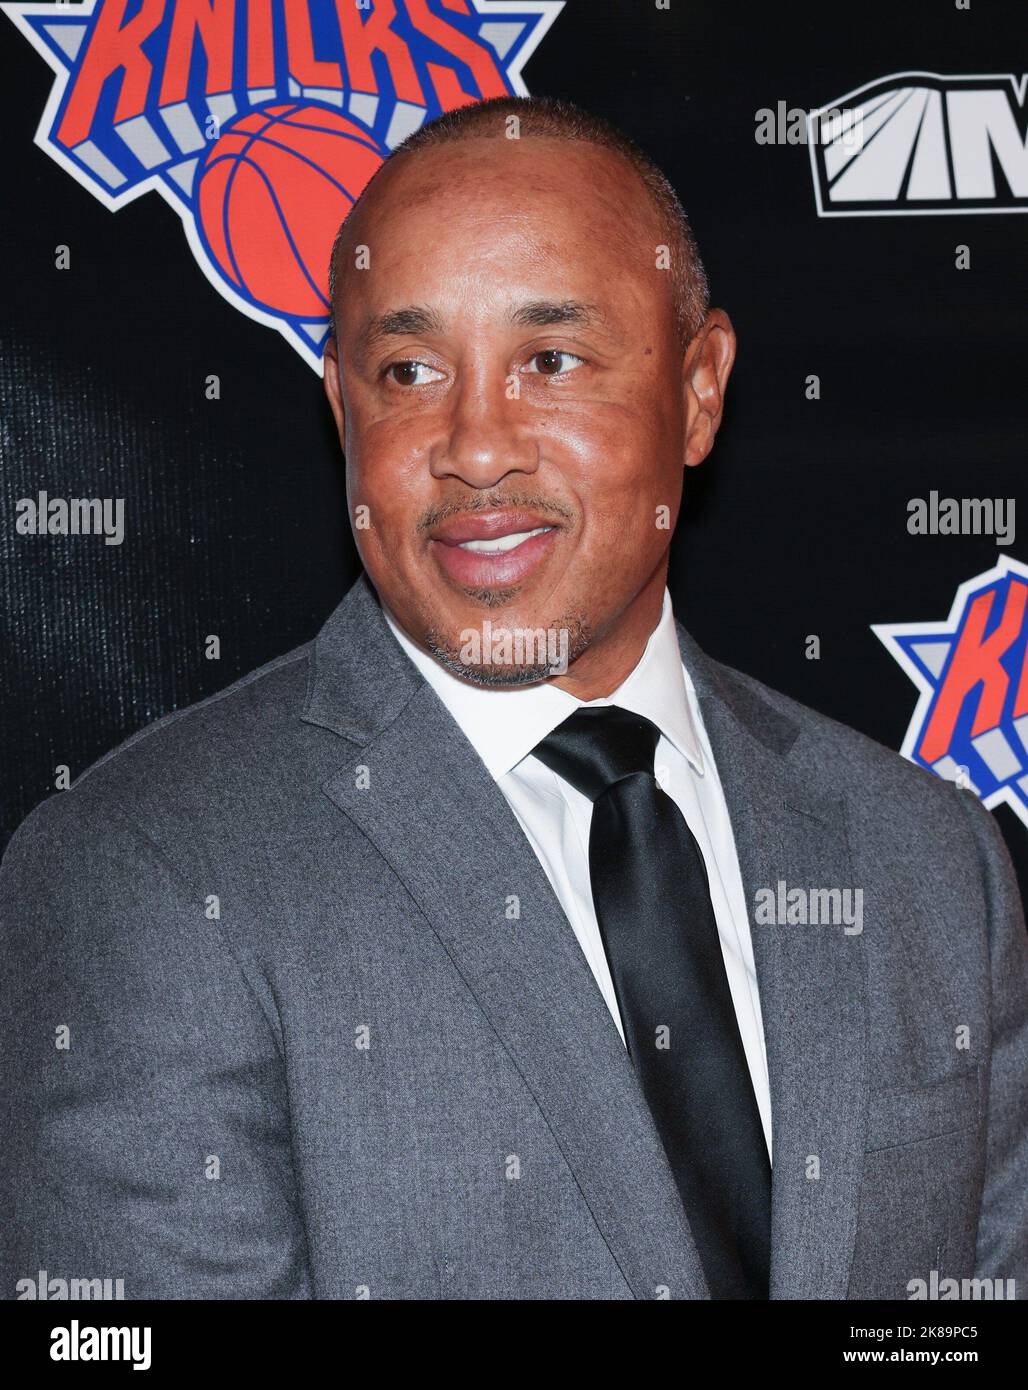 1,222 John Starks Knicks Photos & High Res Pictures - Getty Images